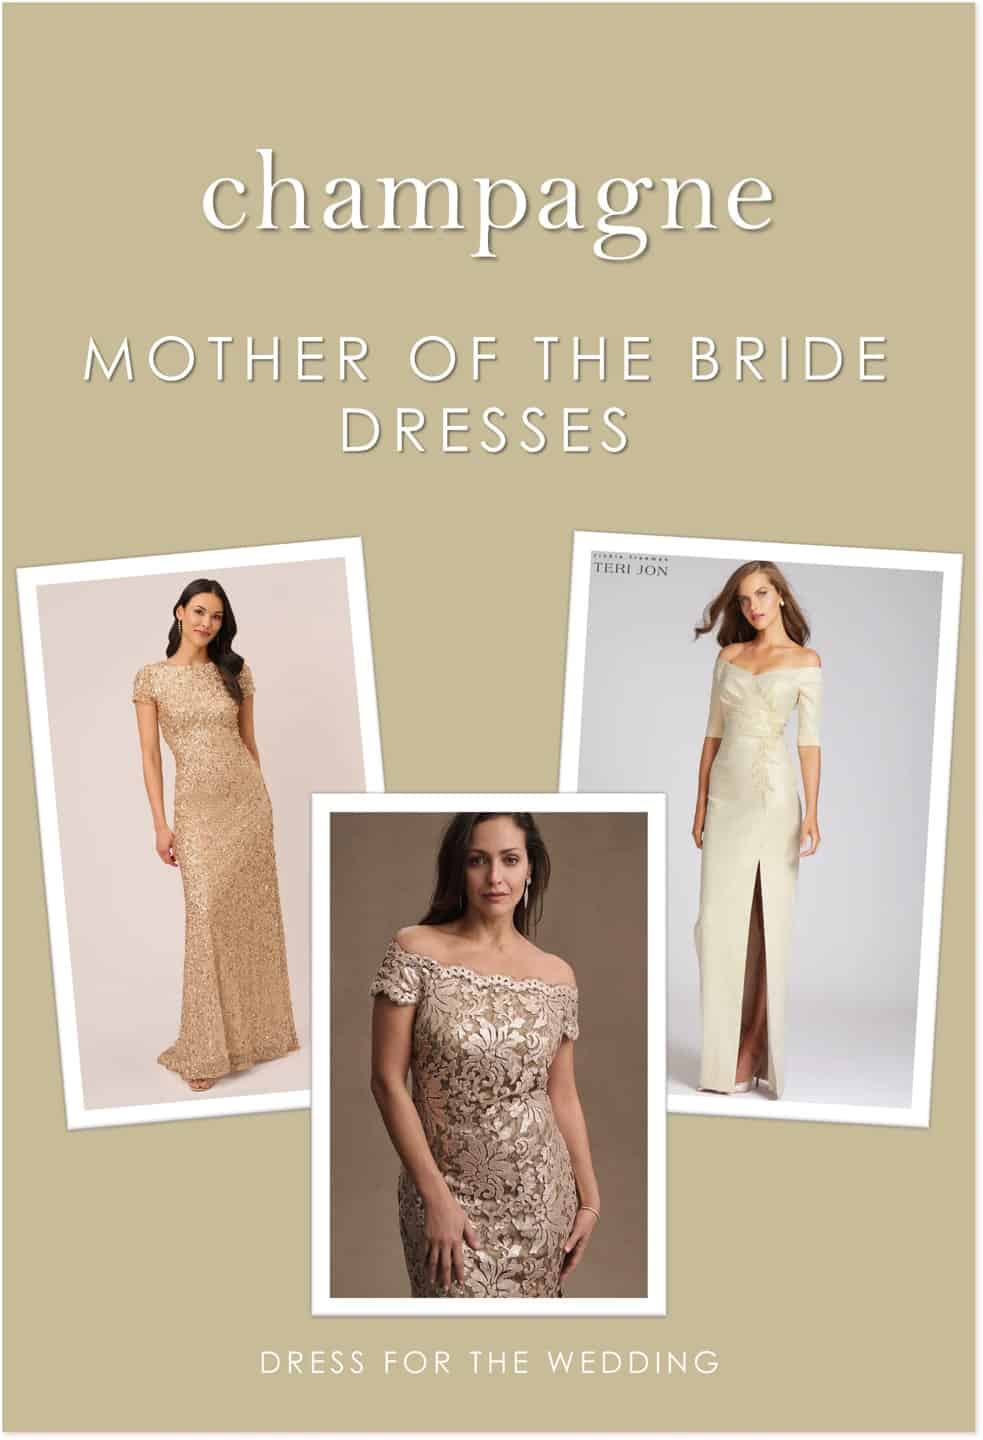 Champagne Mother of the Bride Dresses - Dress for the Wedding